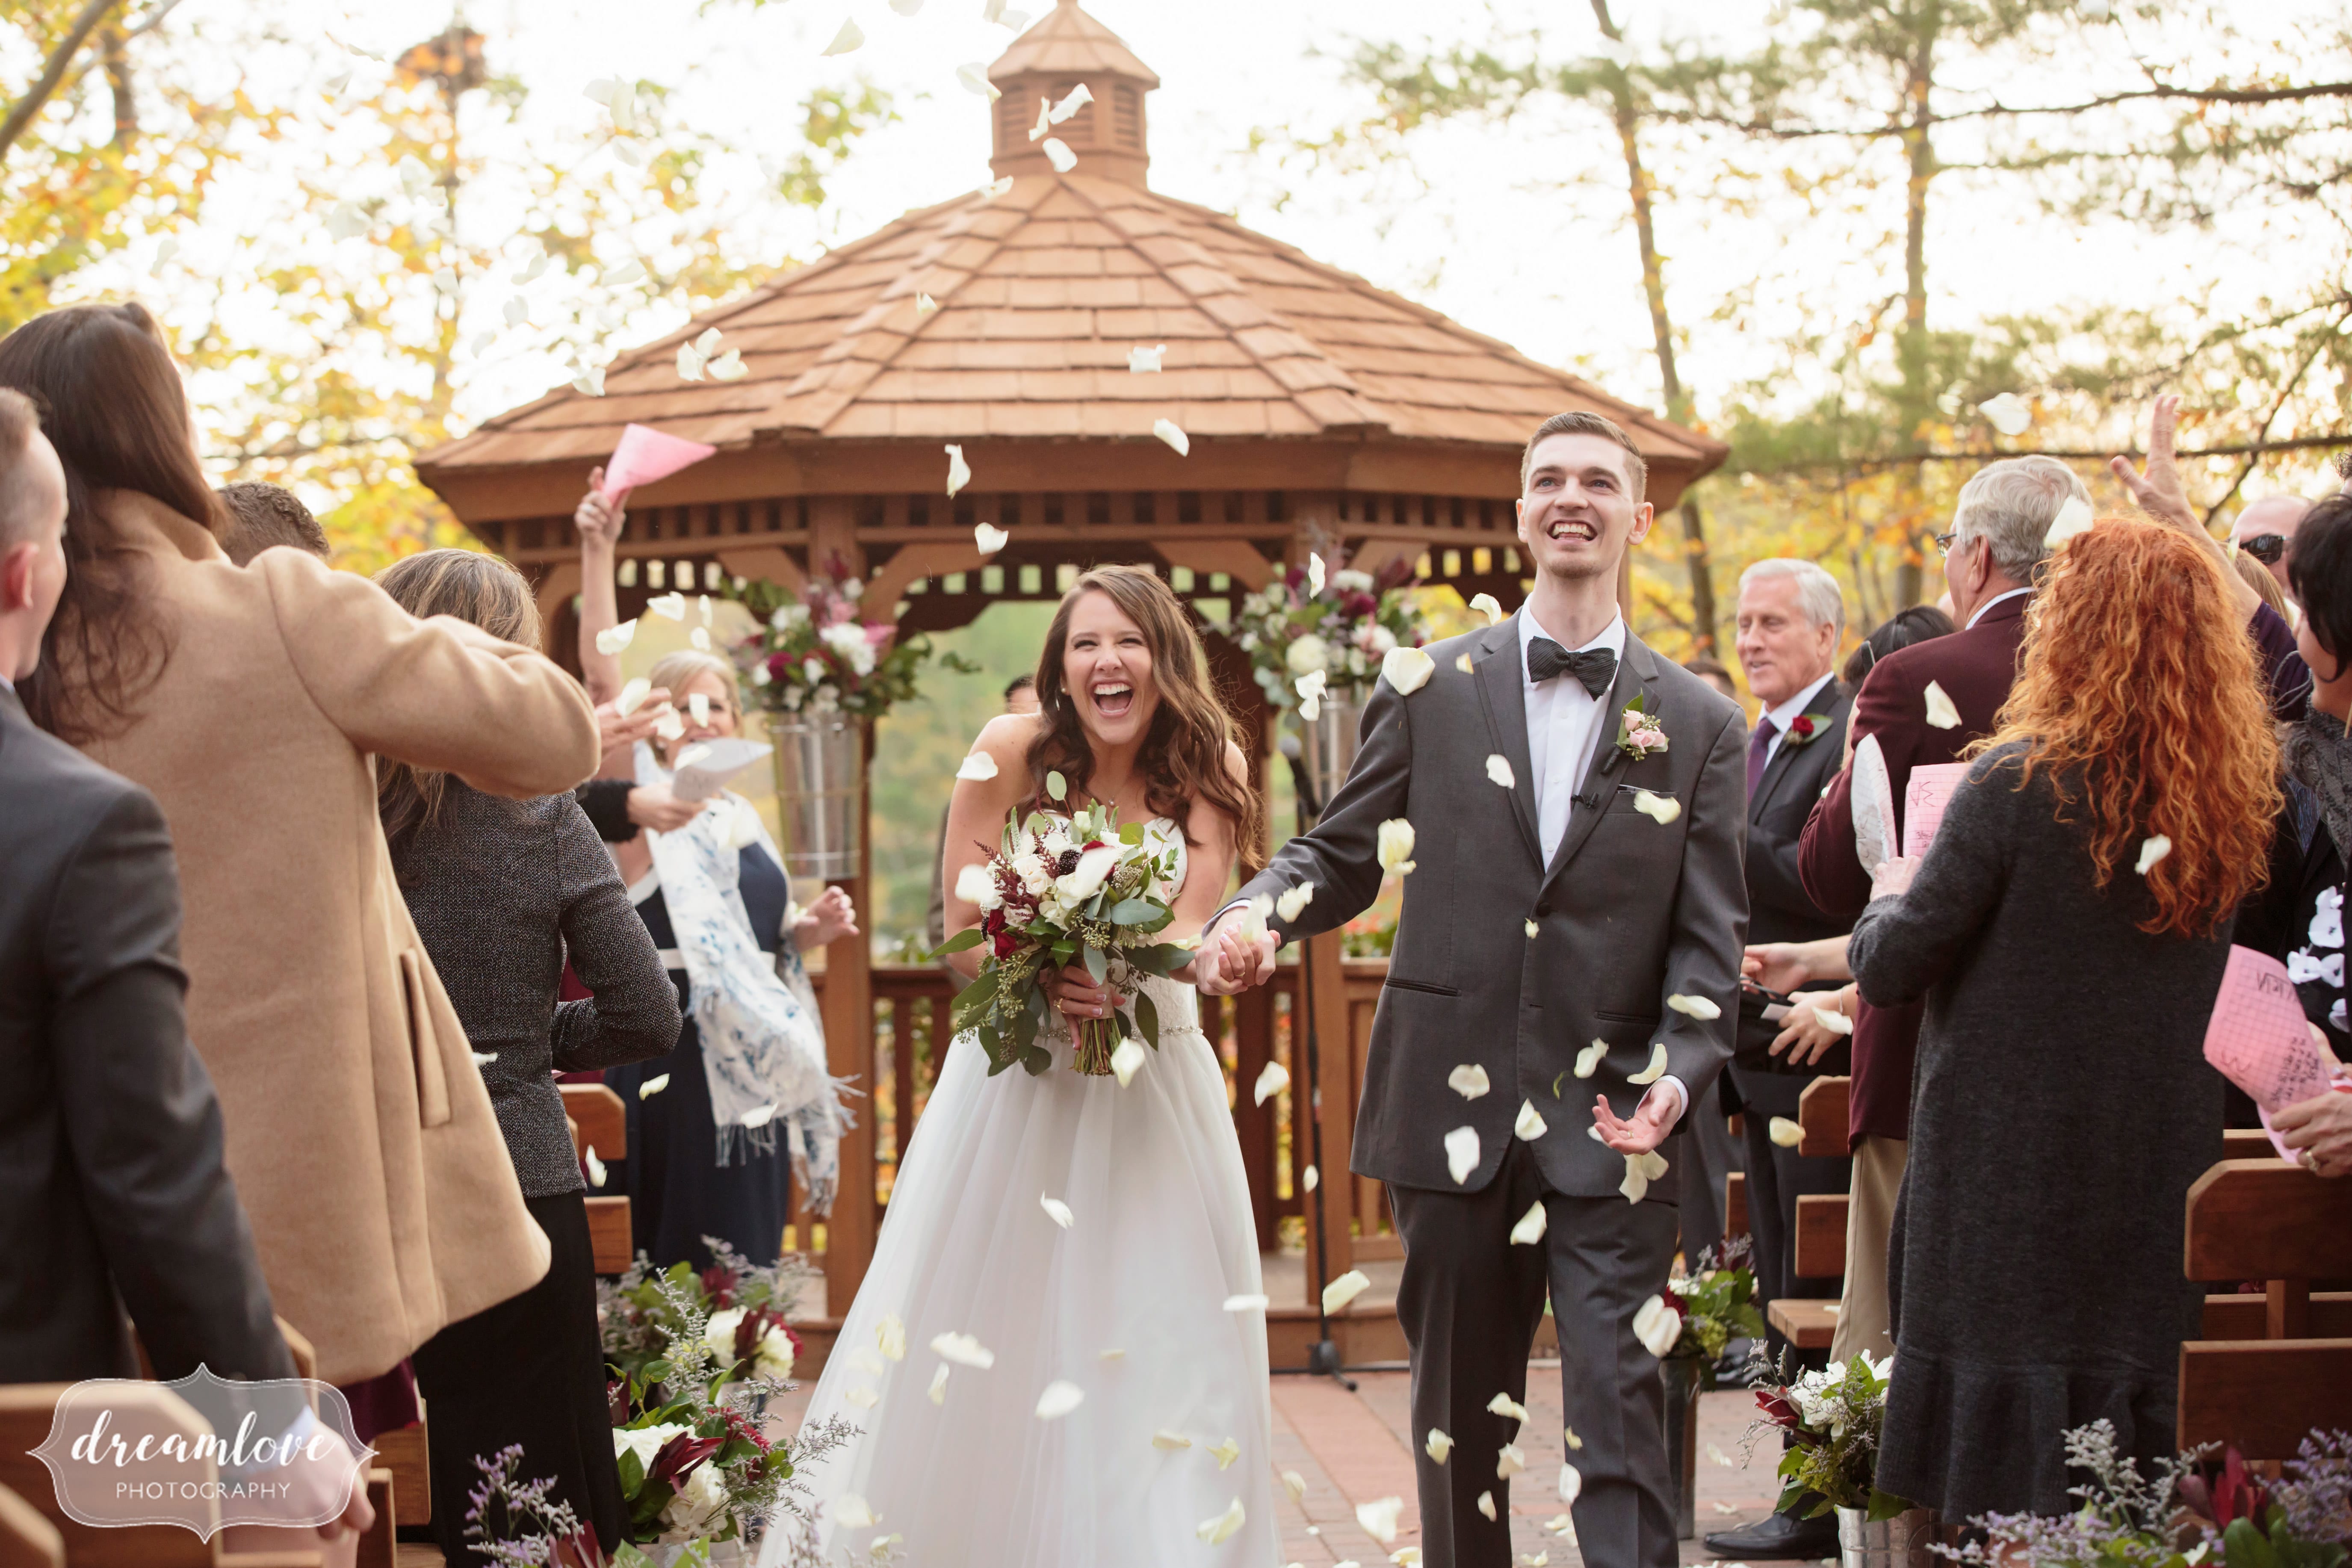 The bride and groom full of joy as they exit their wedding ceremony and guests throw flower petals around them!